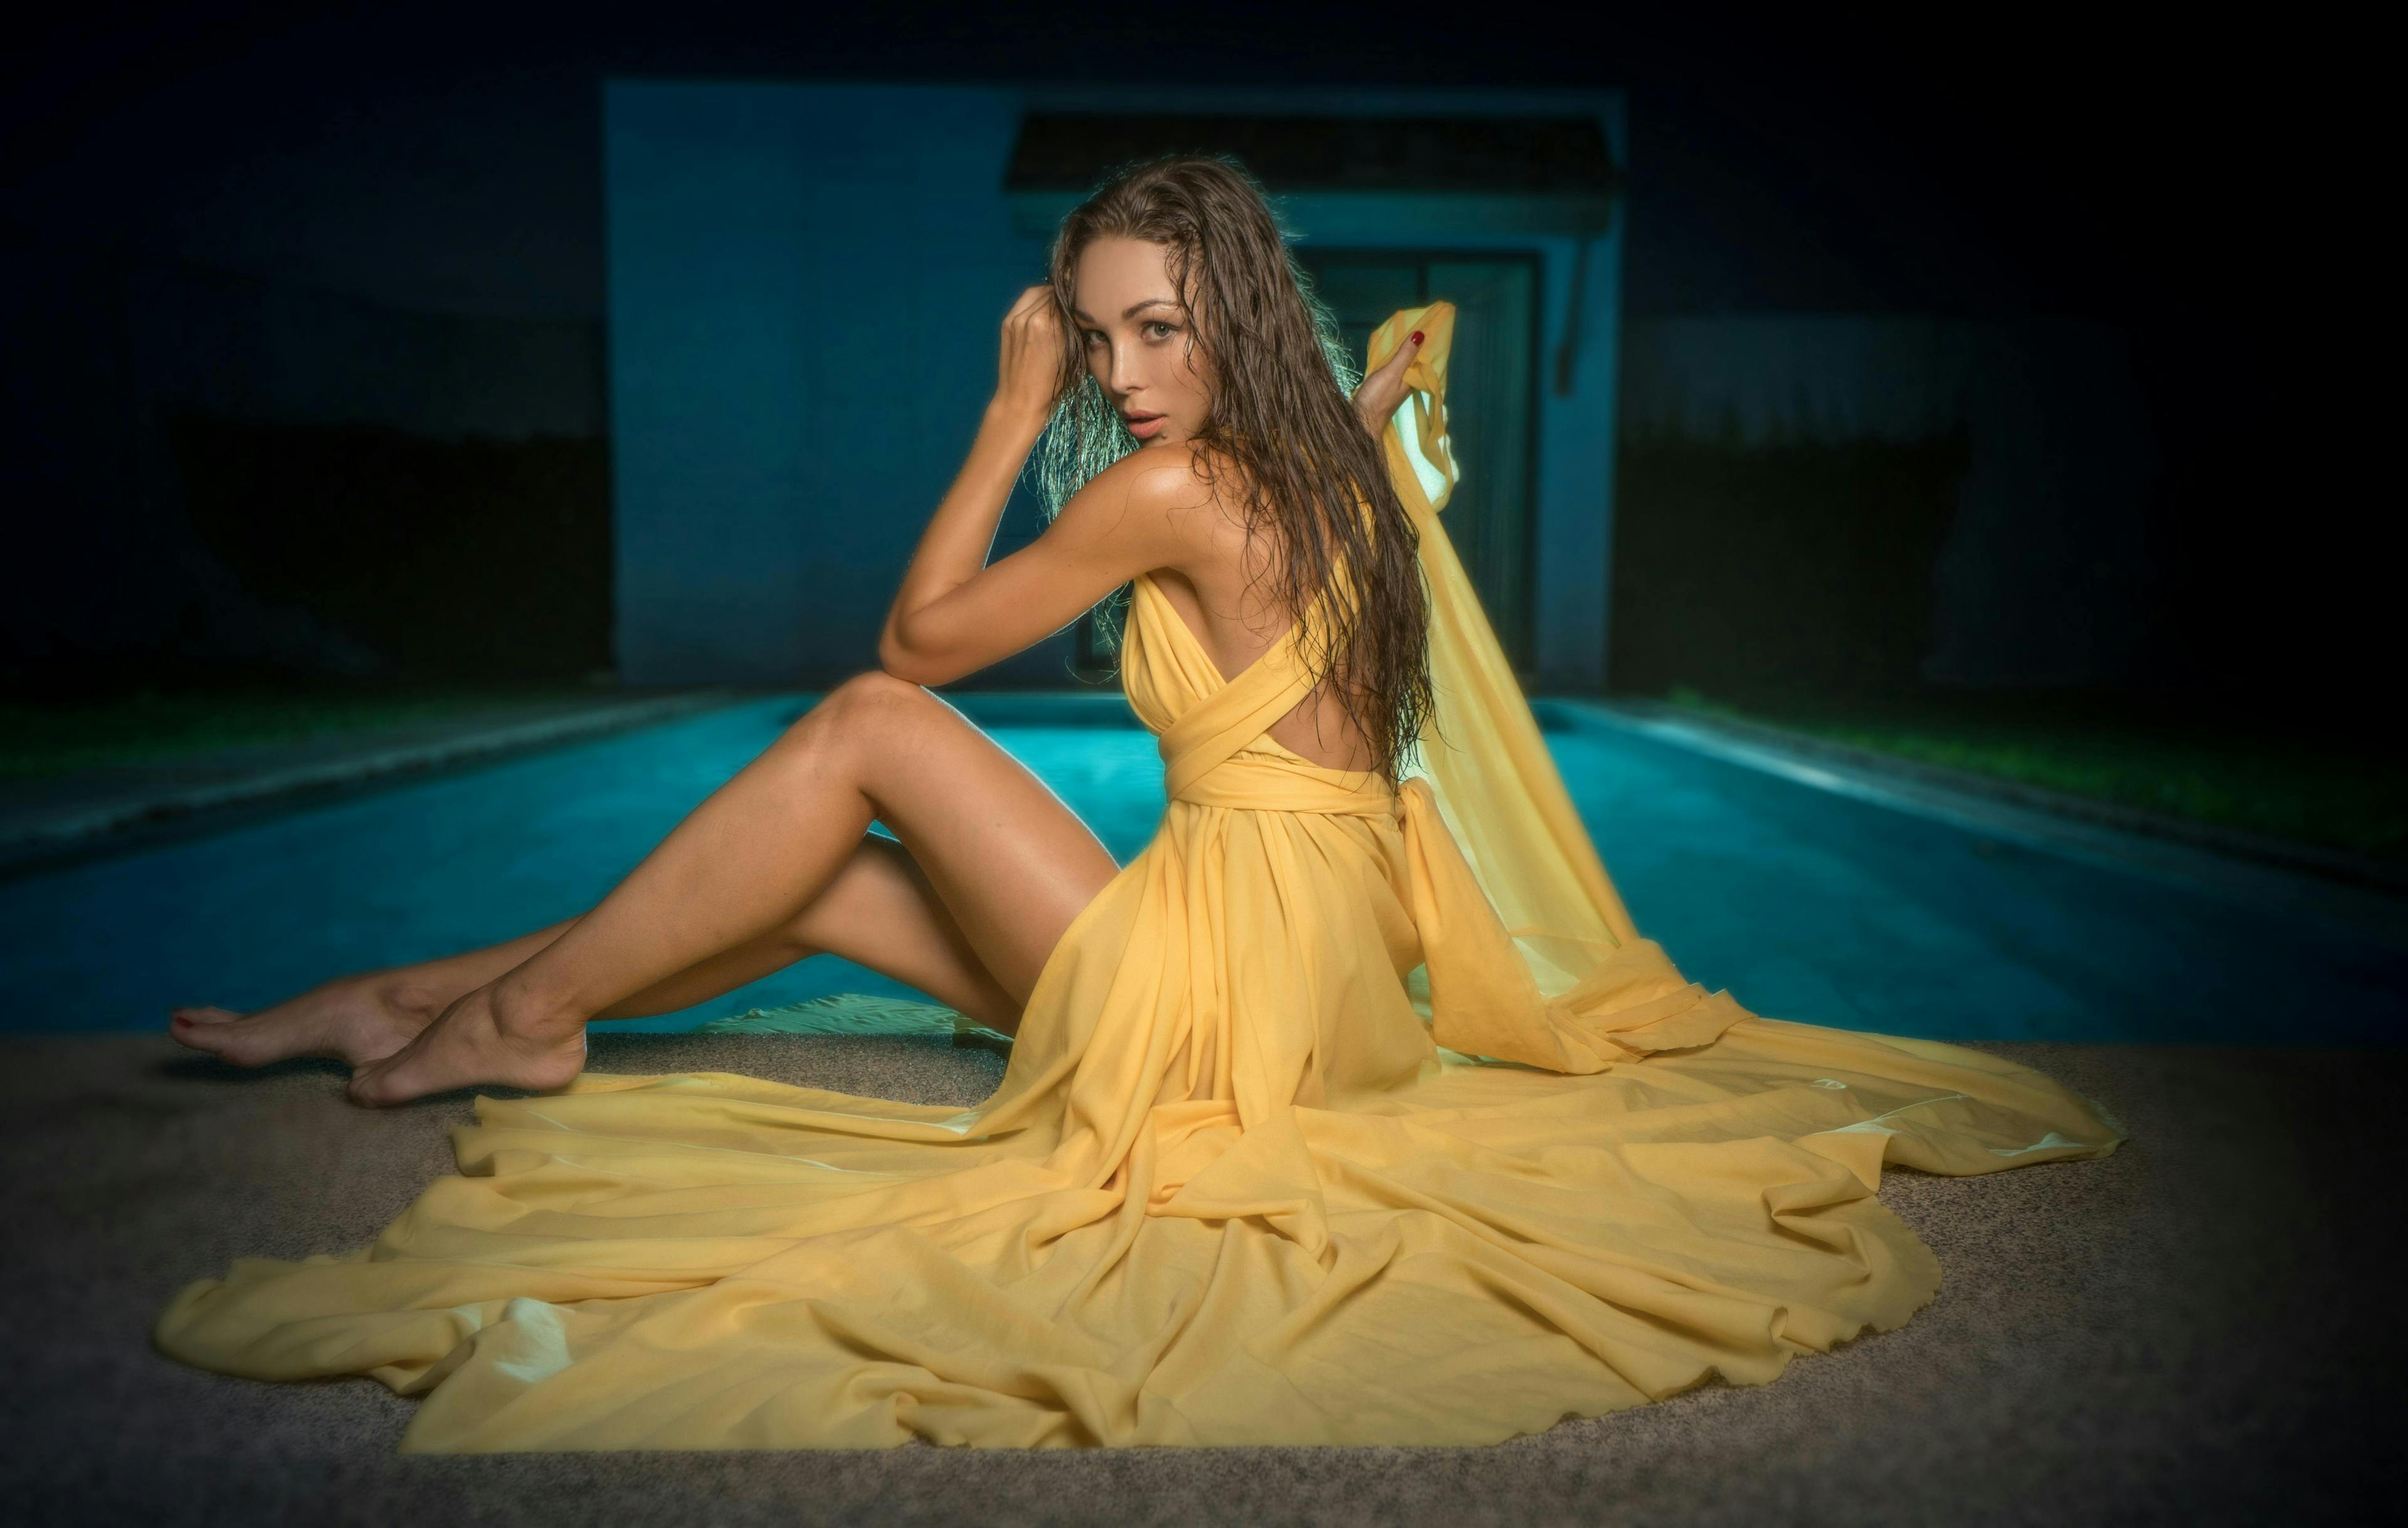 makeup,dress,woman,beauty,caucasian,bright,skin,slim,yellow,body,cute,long,summer,beautiful,chic,swimming,hair,outfit,brunette,dark,vacation,model,coctail,female,elegant,luxurious,pretty,attractive,sensual,sexy,one,pool,rich,girl,glamour,look,apartament,glowing,gorgeous,charming,lady,luxury,style,evening,party,posing,villa,fashion dress evening dress formal wear fashion adult female person woman sitting gown